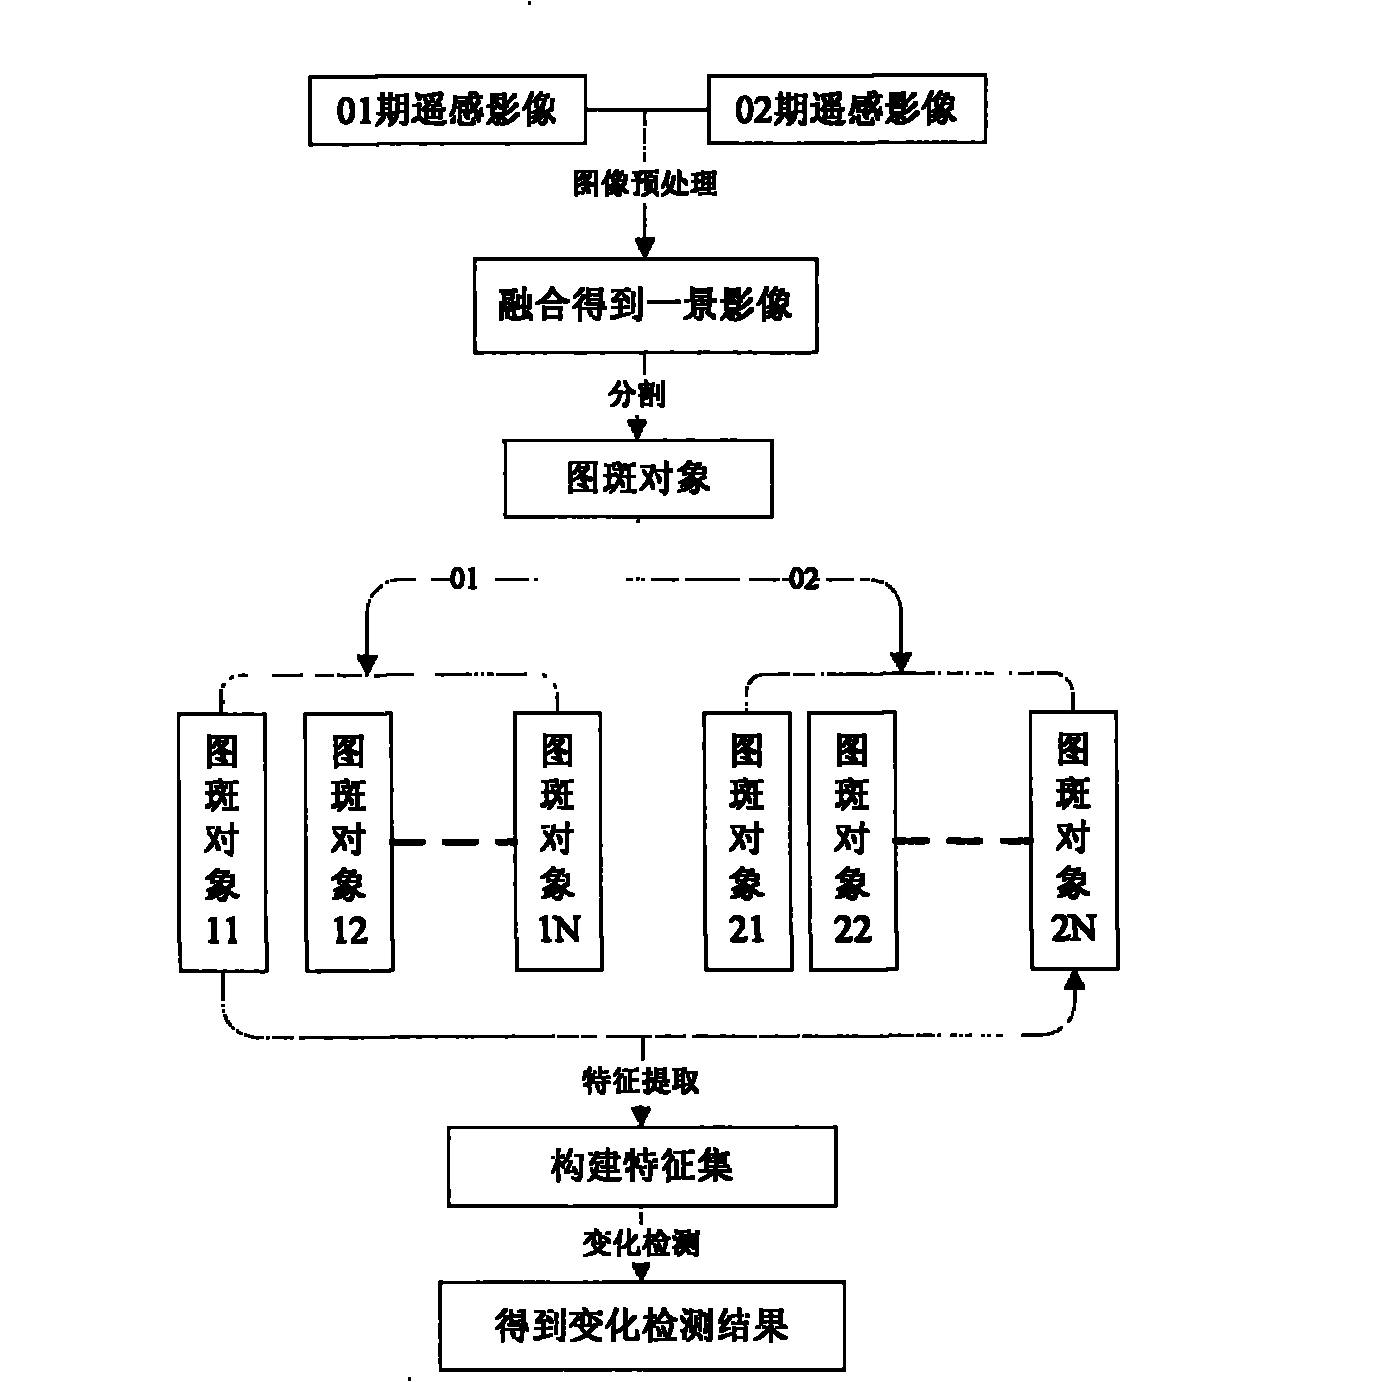 Method for carrying out change detection on multi-level segmented remote sensing image